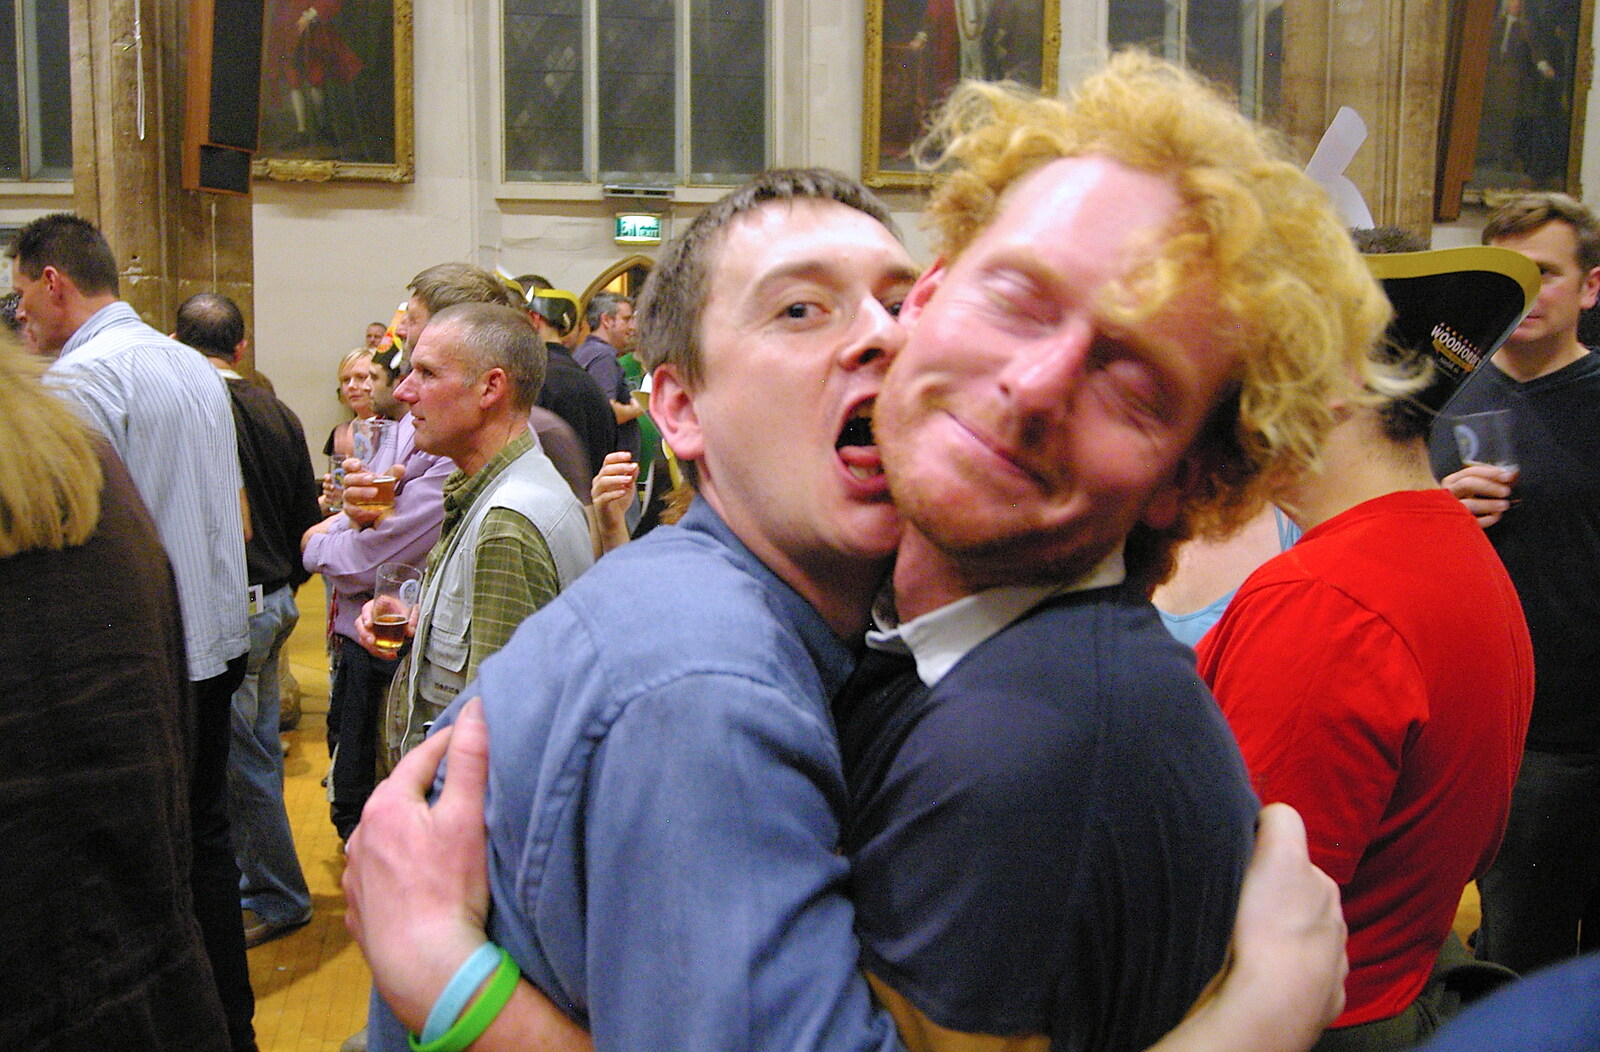 The 28th Norwich Beer Festival, St. Andrew's Hall, Norwich - 26th October 2005: Andrew gets intimate with Wavy